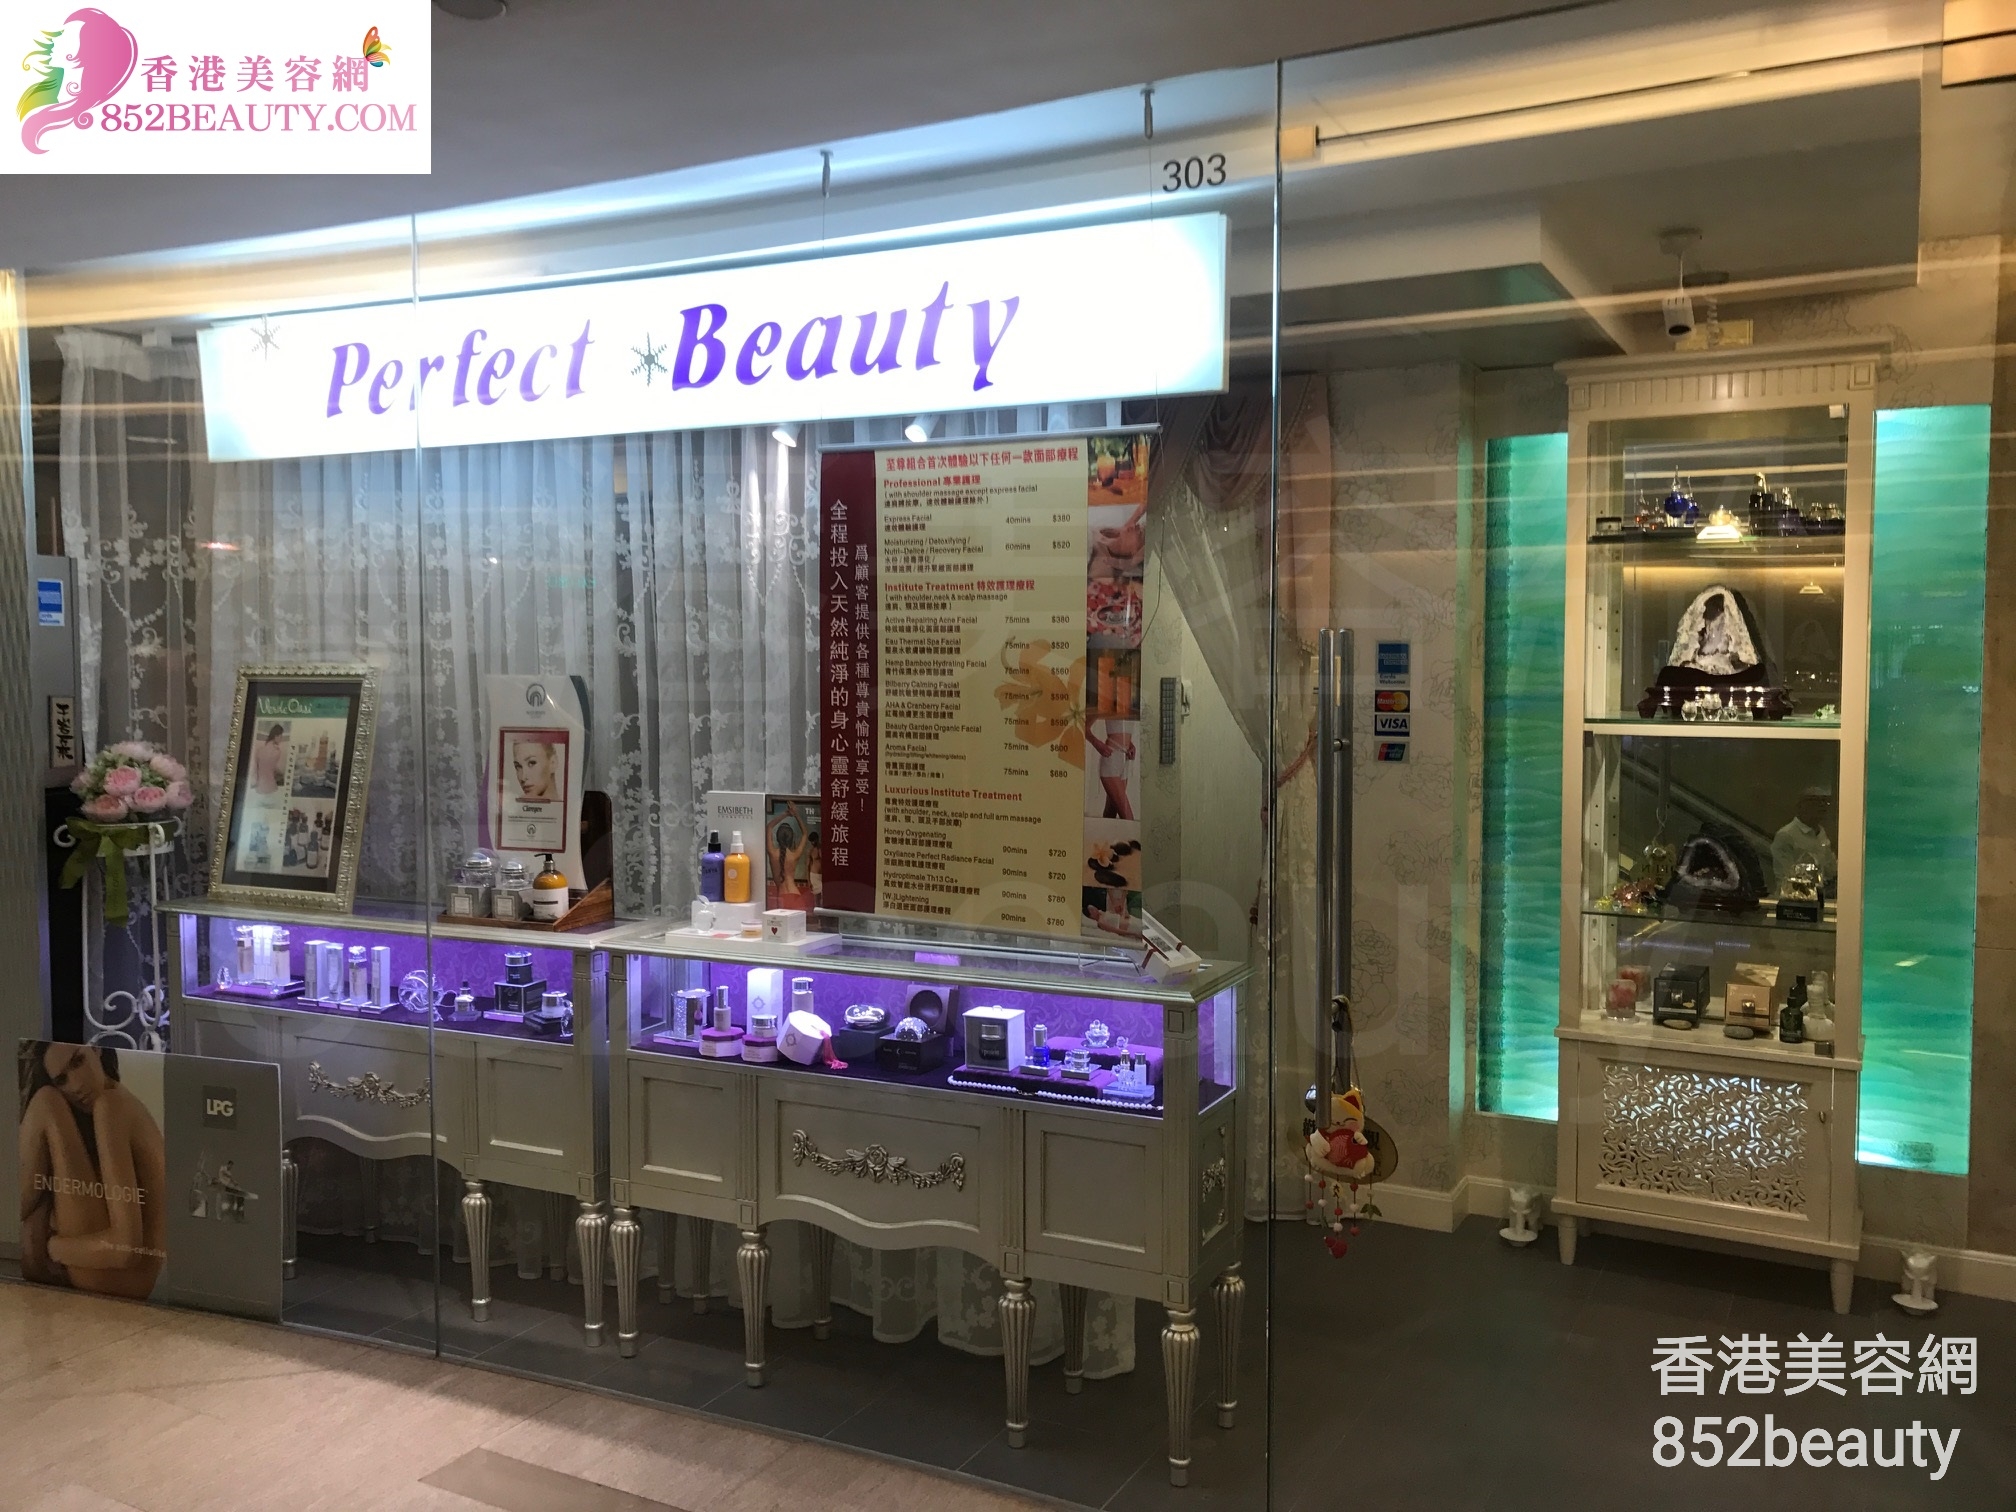 Hair Removal: Perfect Beauty